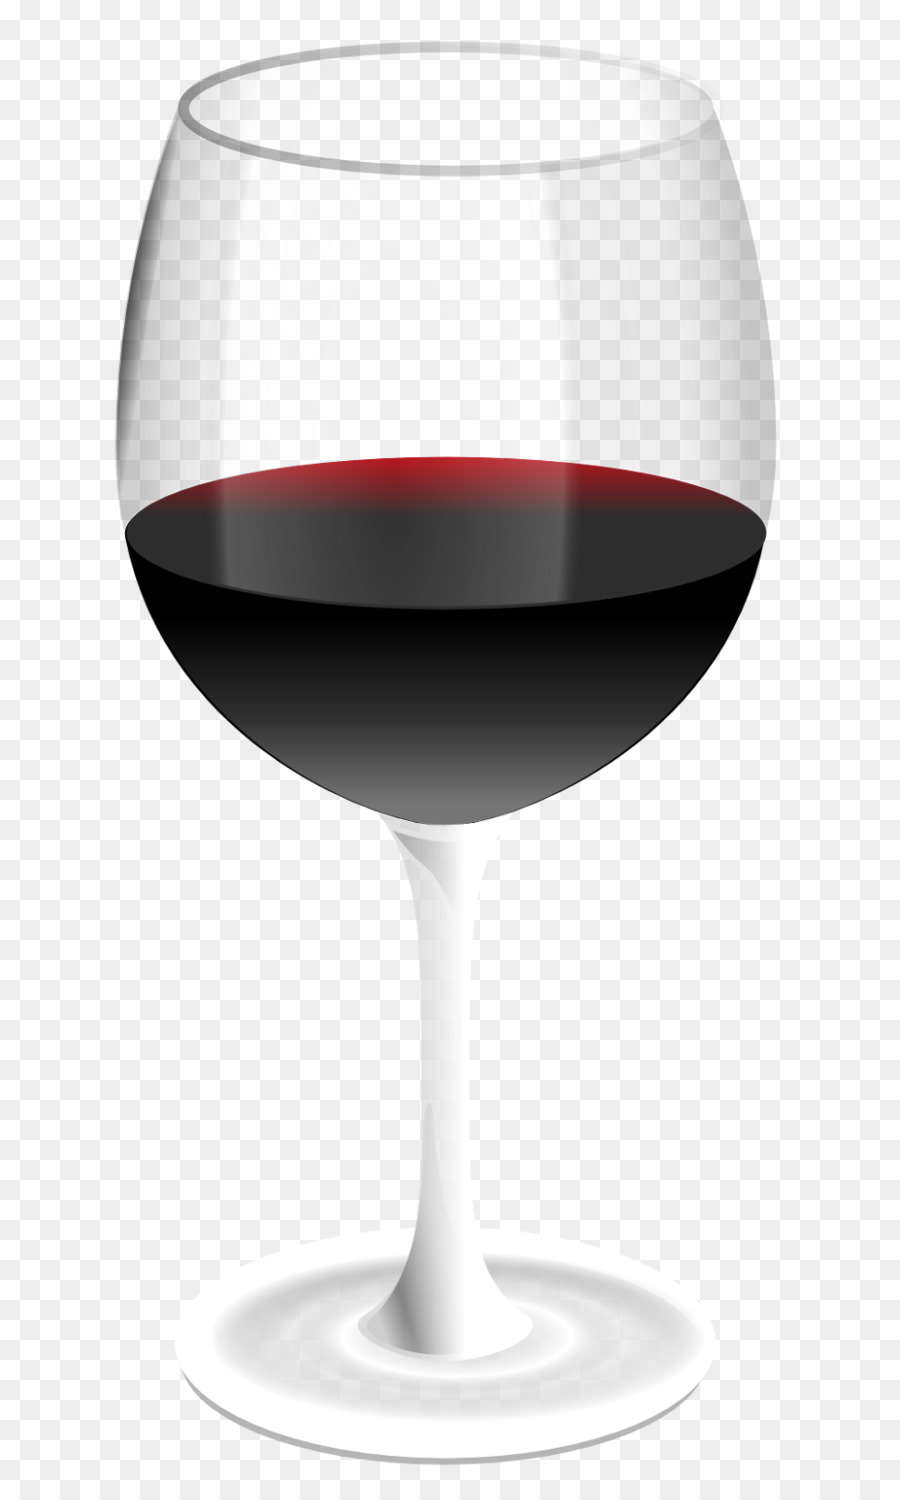 Red Wine Wine glass Clip art - Copa Vino png download - 972*1600 - Free Transparent Wine png Download.